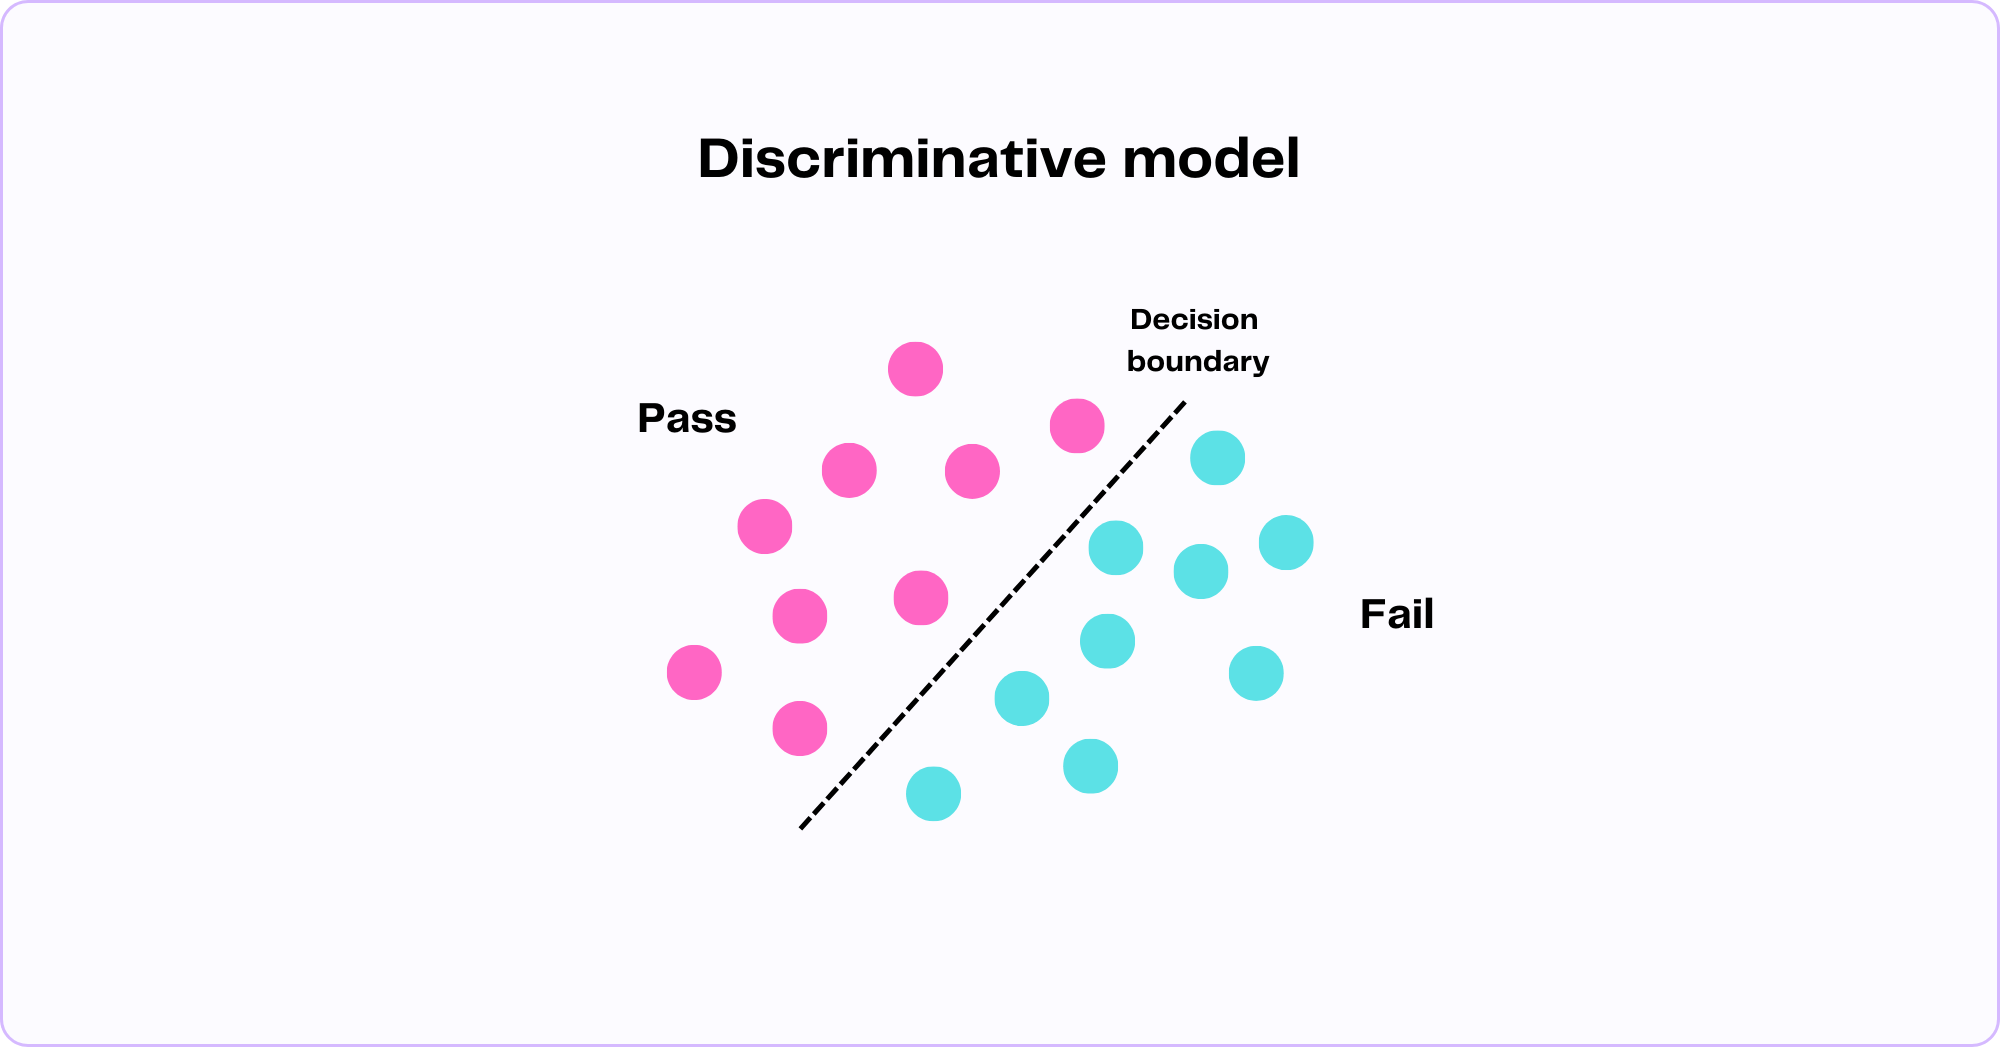 Simplified illustrated decision boundary for discriminative models